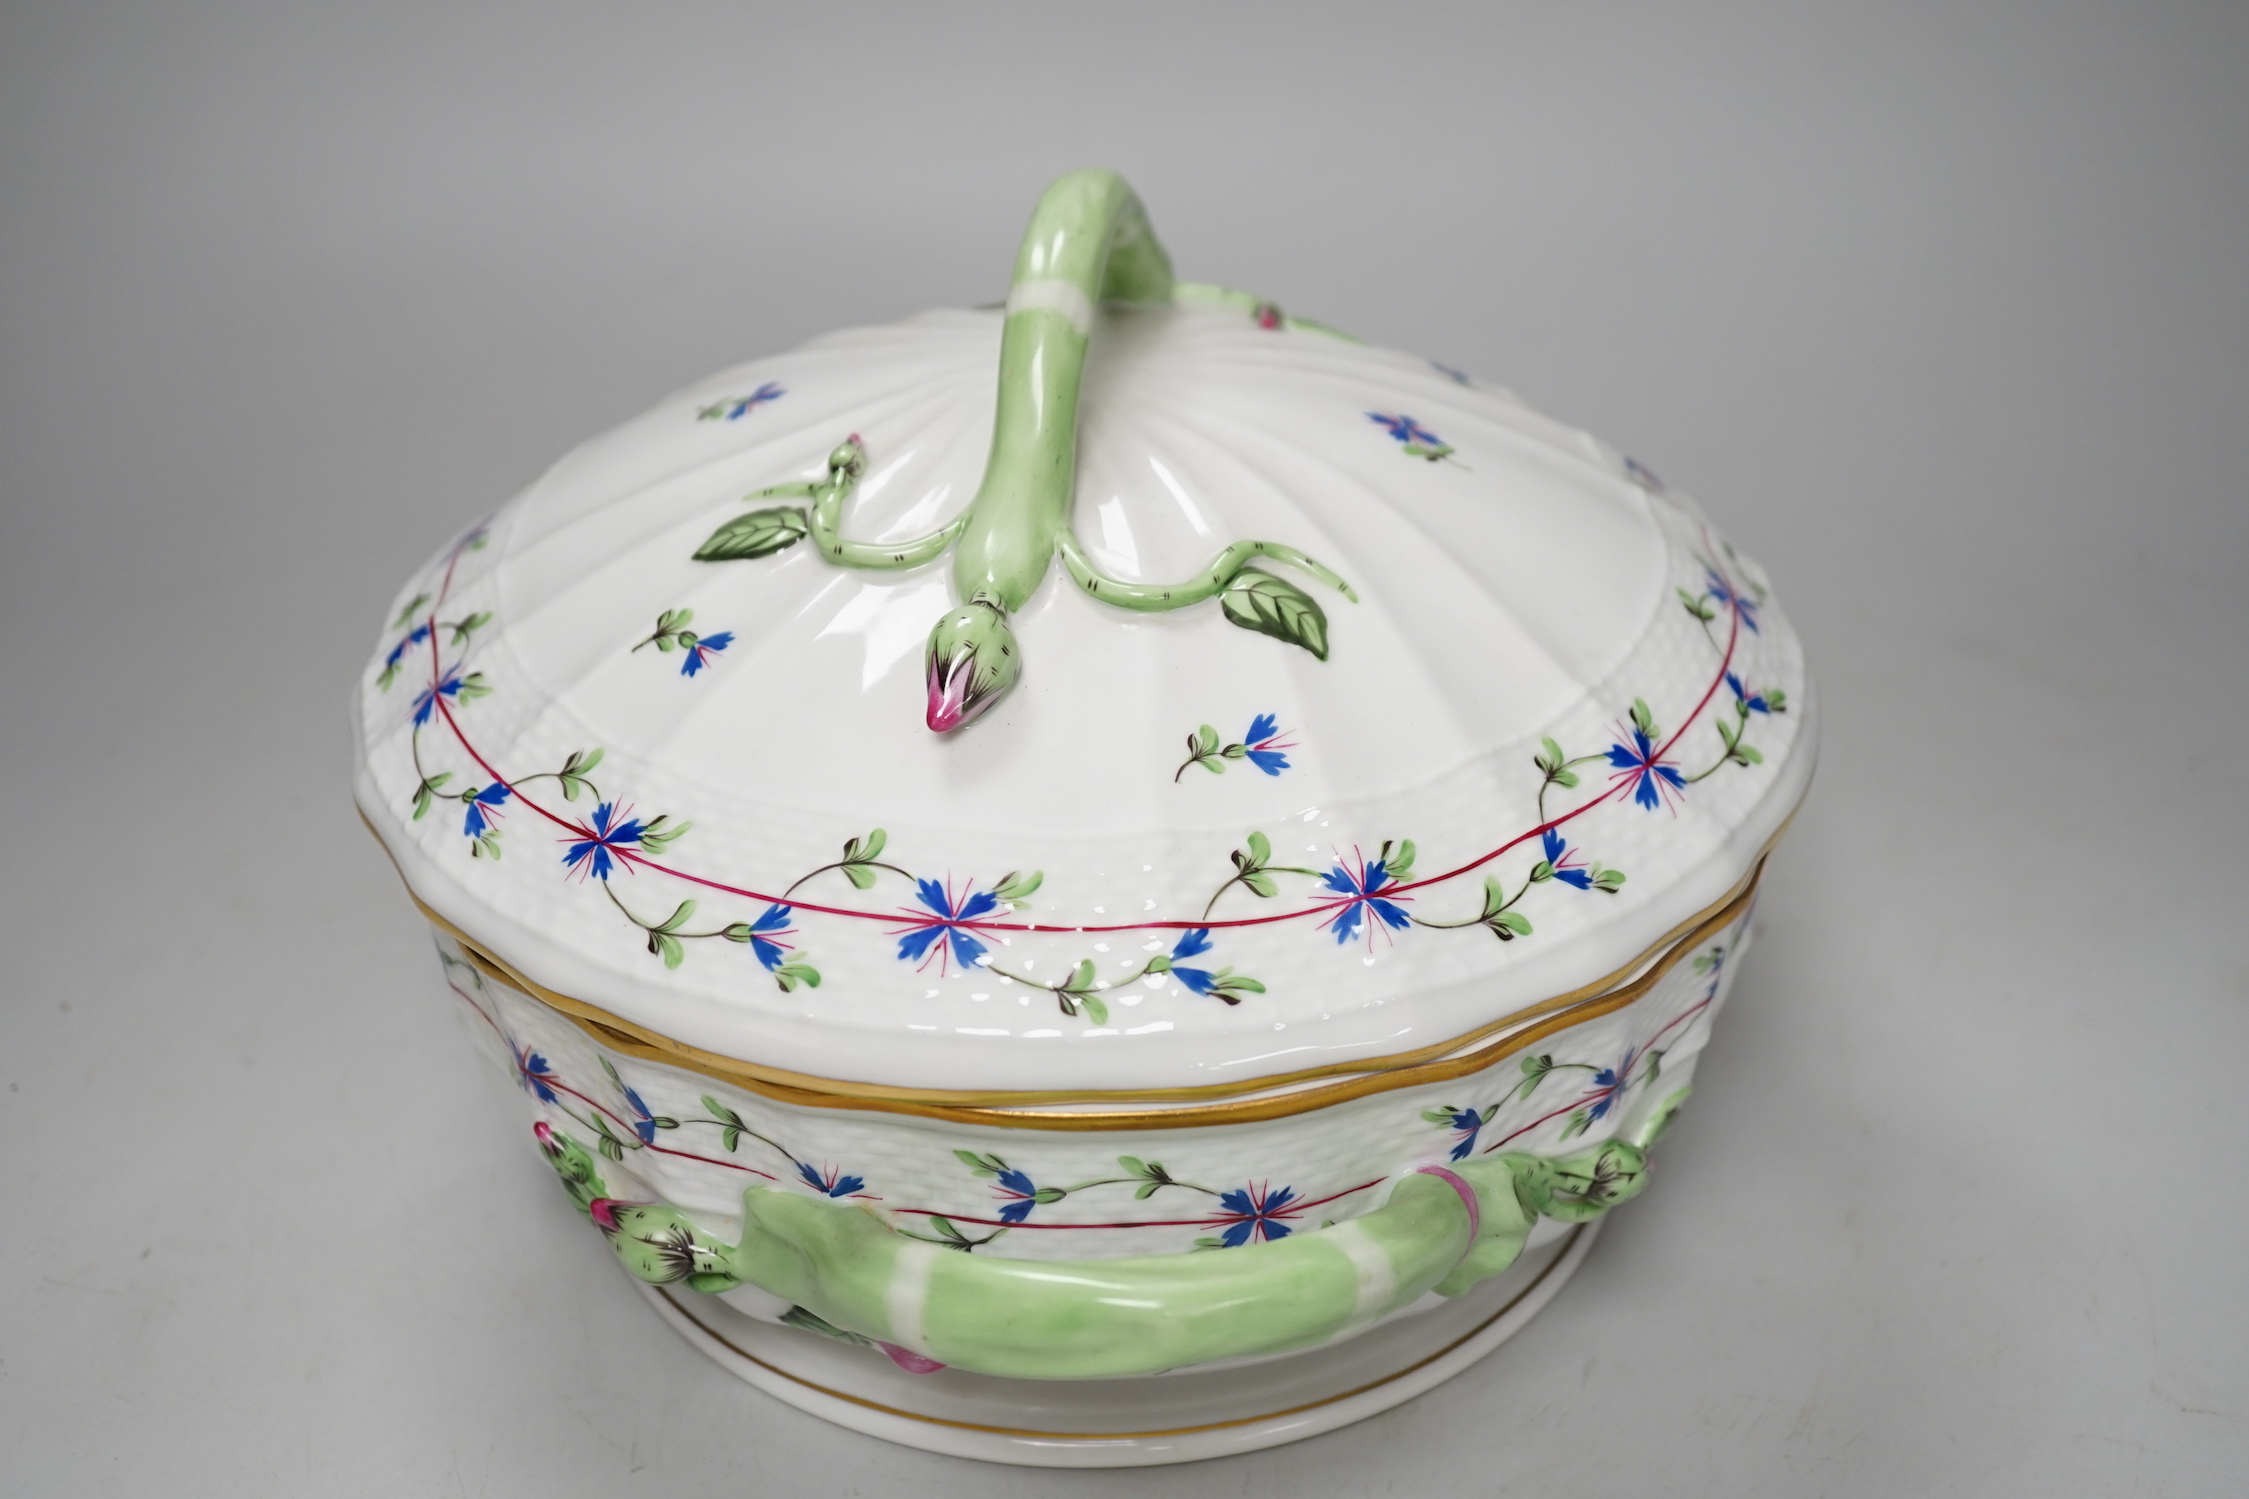 A Herend ‘Chantilly flowers’ tureen and cover, 22cm diam.